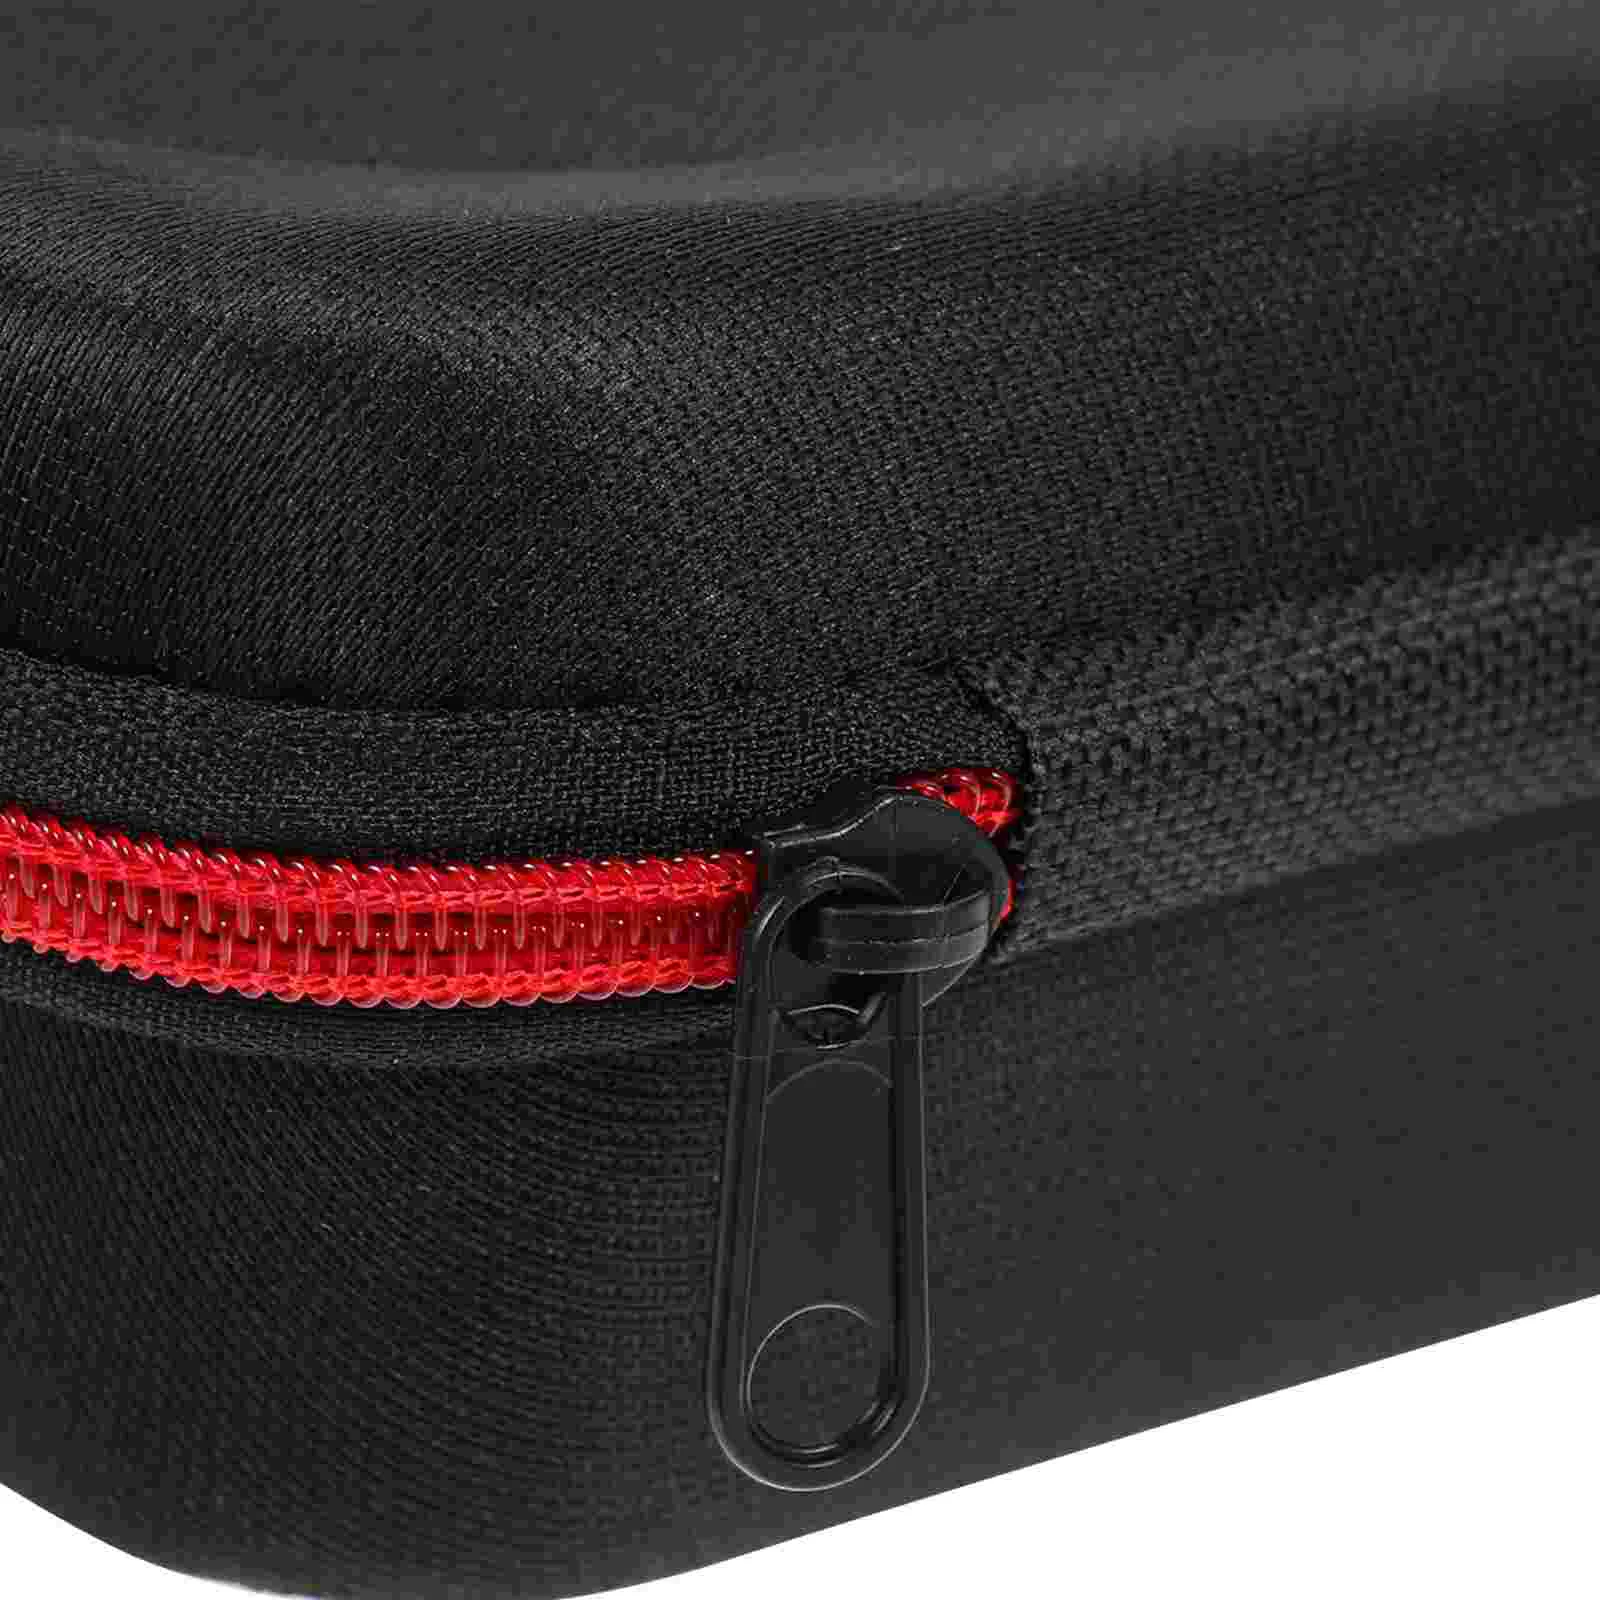 Travel Container Mic Storage Container Portable Microphone Bag Hard Shell Mic Bag Mic Carrying Case Mic Storage Box Zipper enlarge